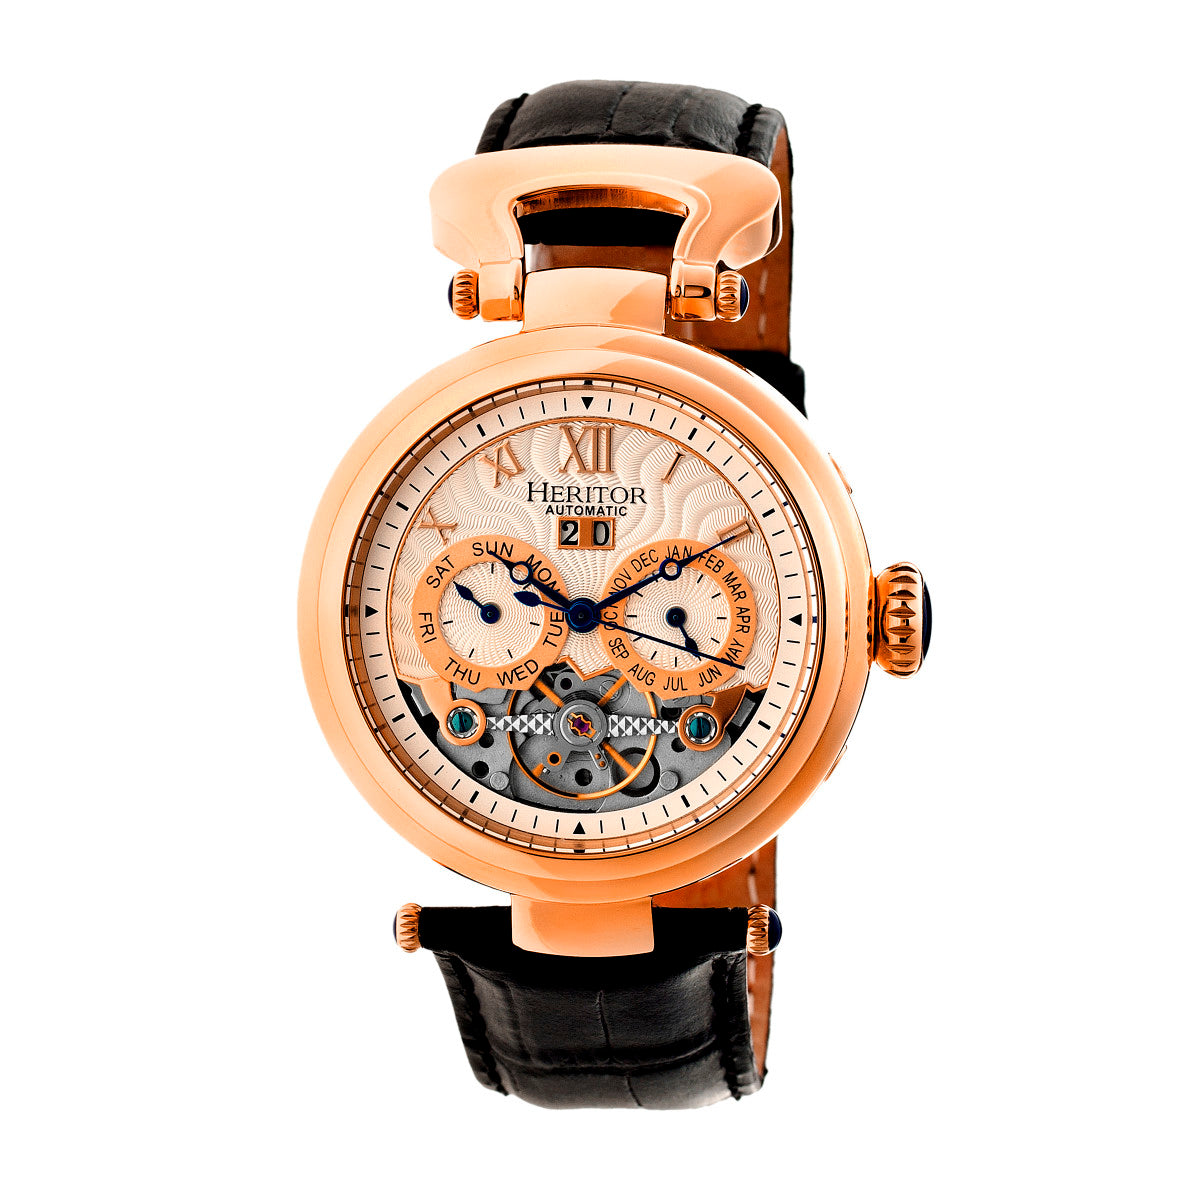 Men’s Silver / Rose Gold Ganzi Semi-Skeleton Leather-Band Watch With Day And Date - Rose Gold, Silver One Size Heritor Automatic